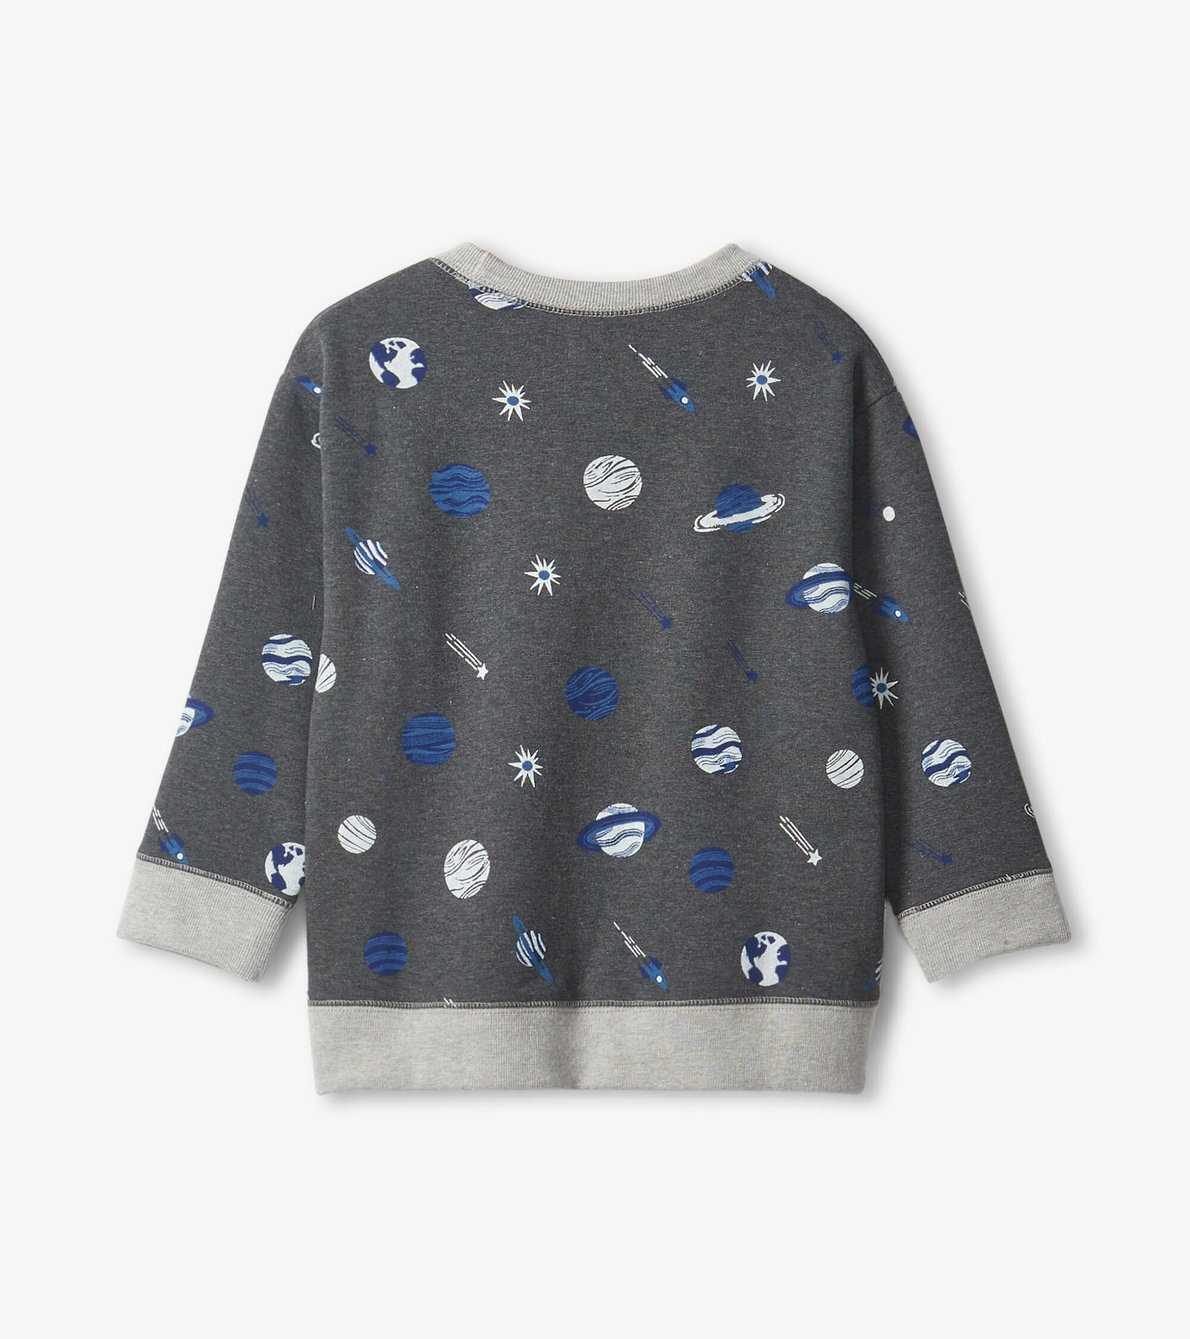 View larger image of Boys Space Explorer Pullover